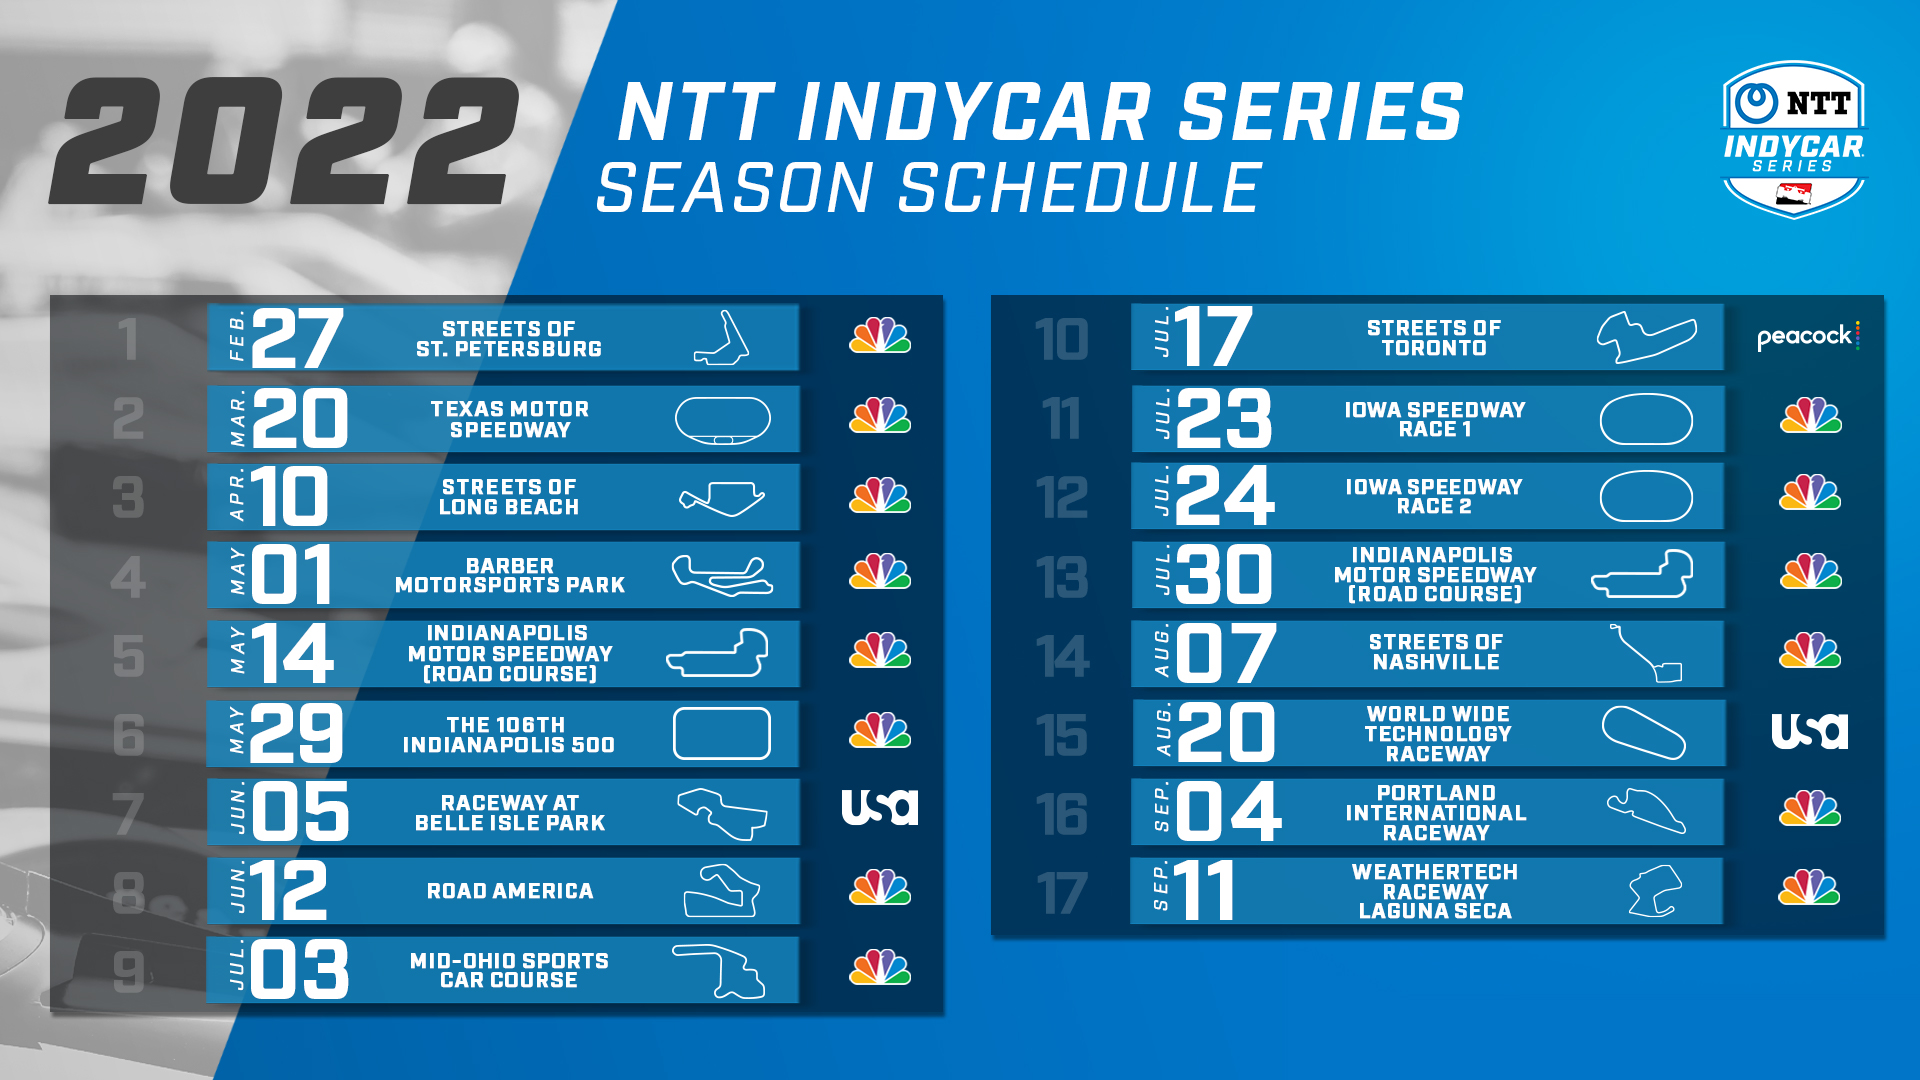 Indycar Schedule 2022 Indycar On Nbc On Twitter: "The 2022 @Indycar Series Schedule Is Here! From  The @Gpstpete To The Finale At @Weathertechrcwy, A Whopping 14 Races Will  Be Broadcast Live On @Nbc. All Races